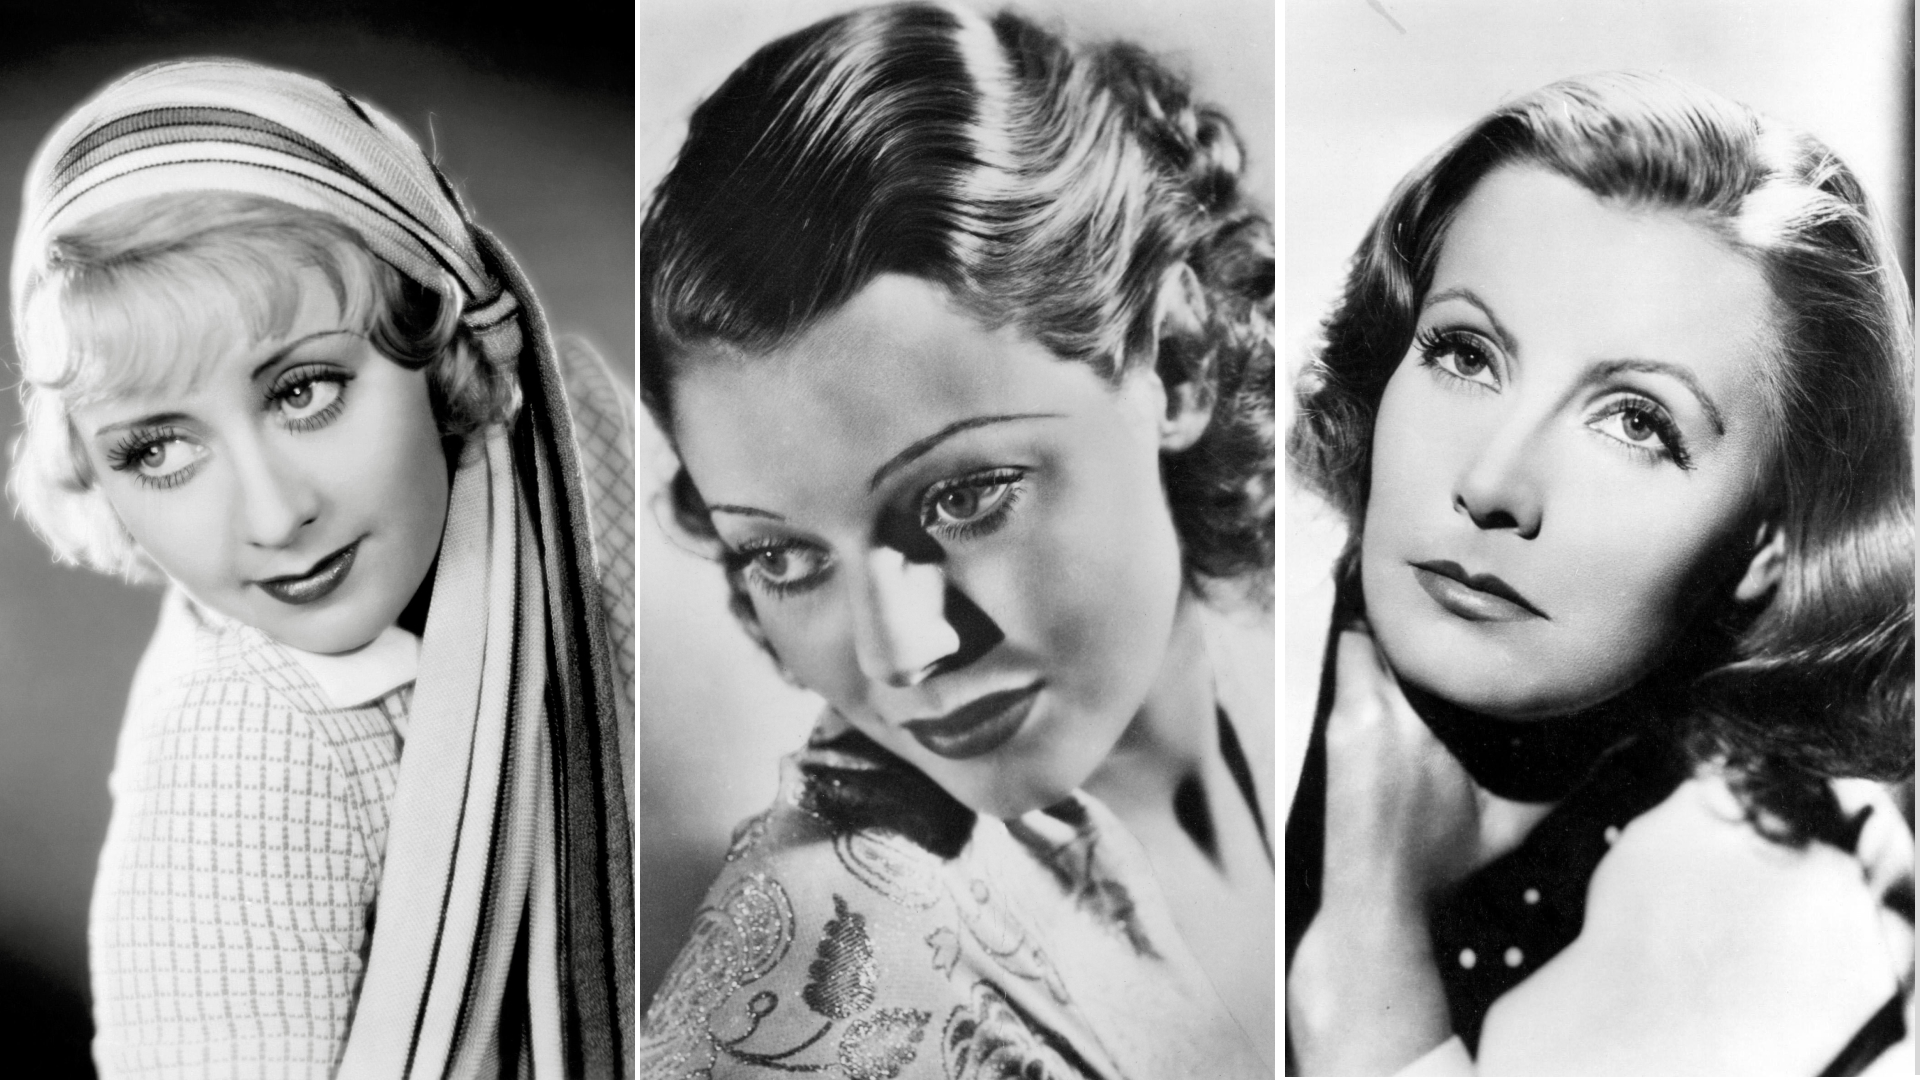 collage of Joan Blondell, Loretta Young, and Greta Garbo